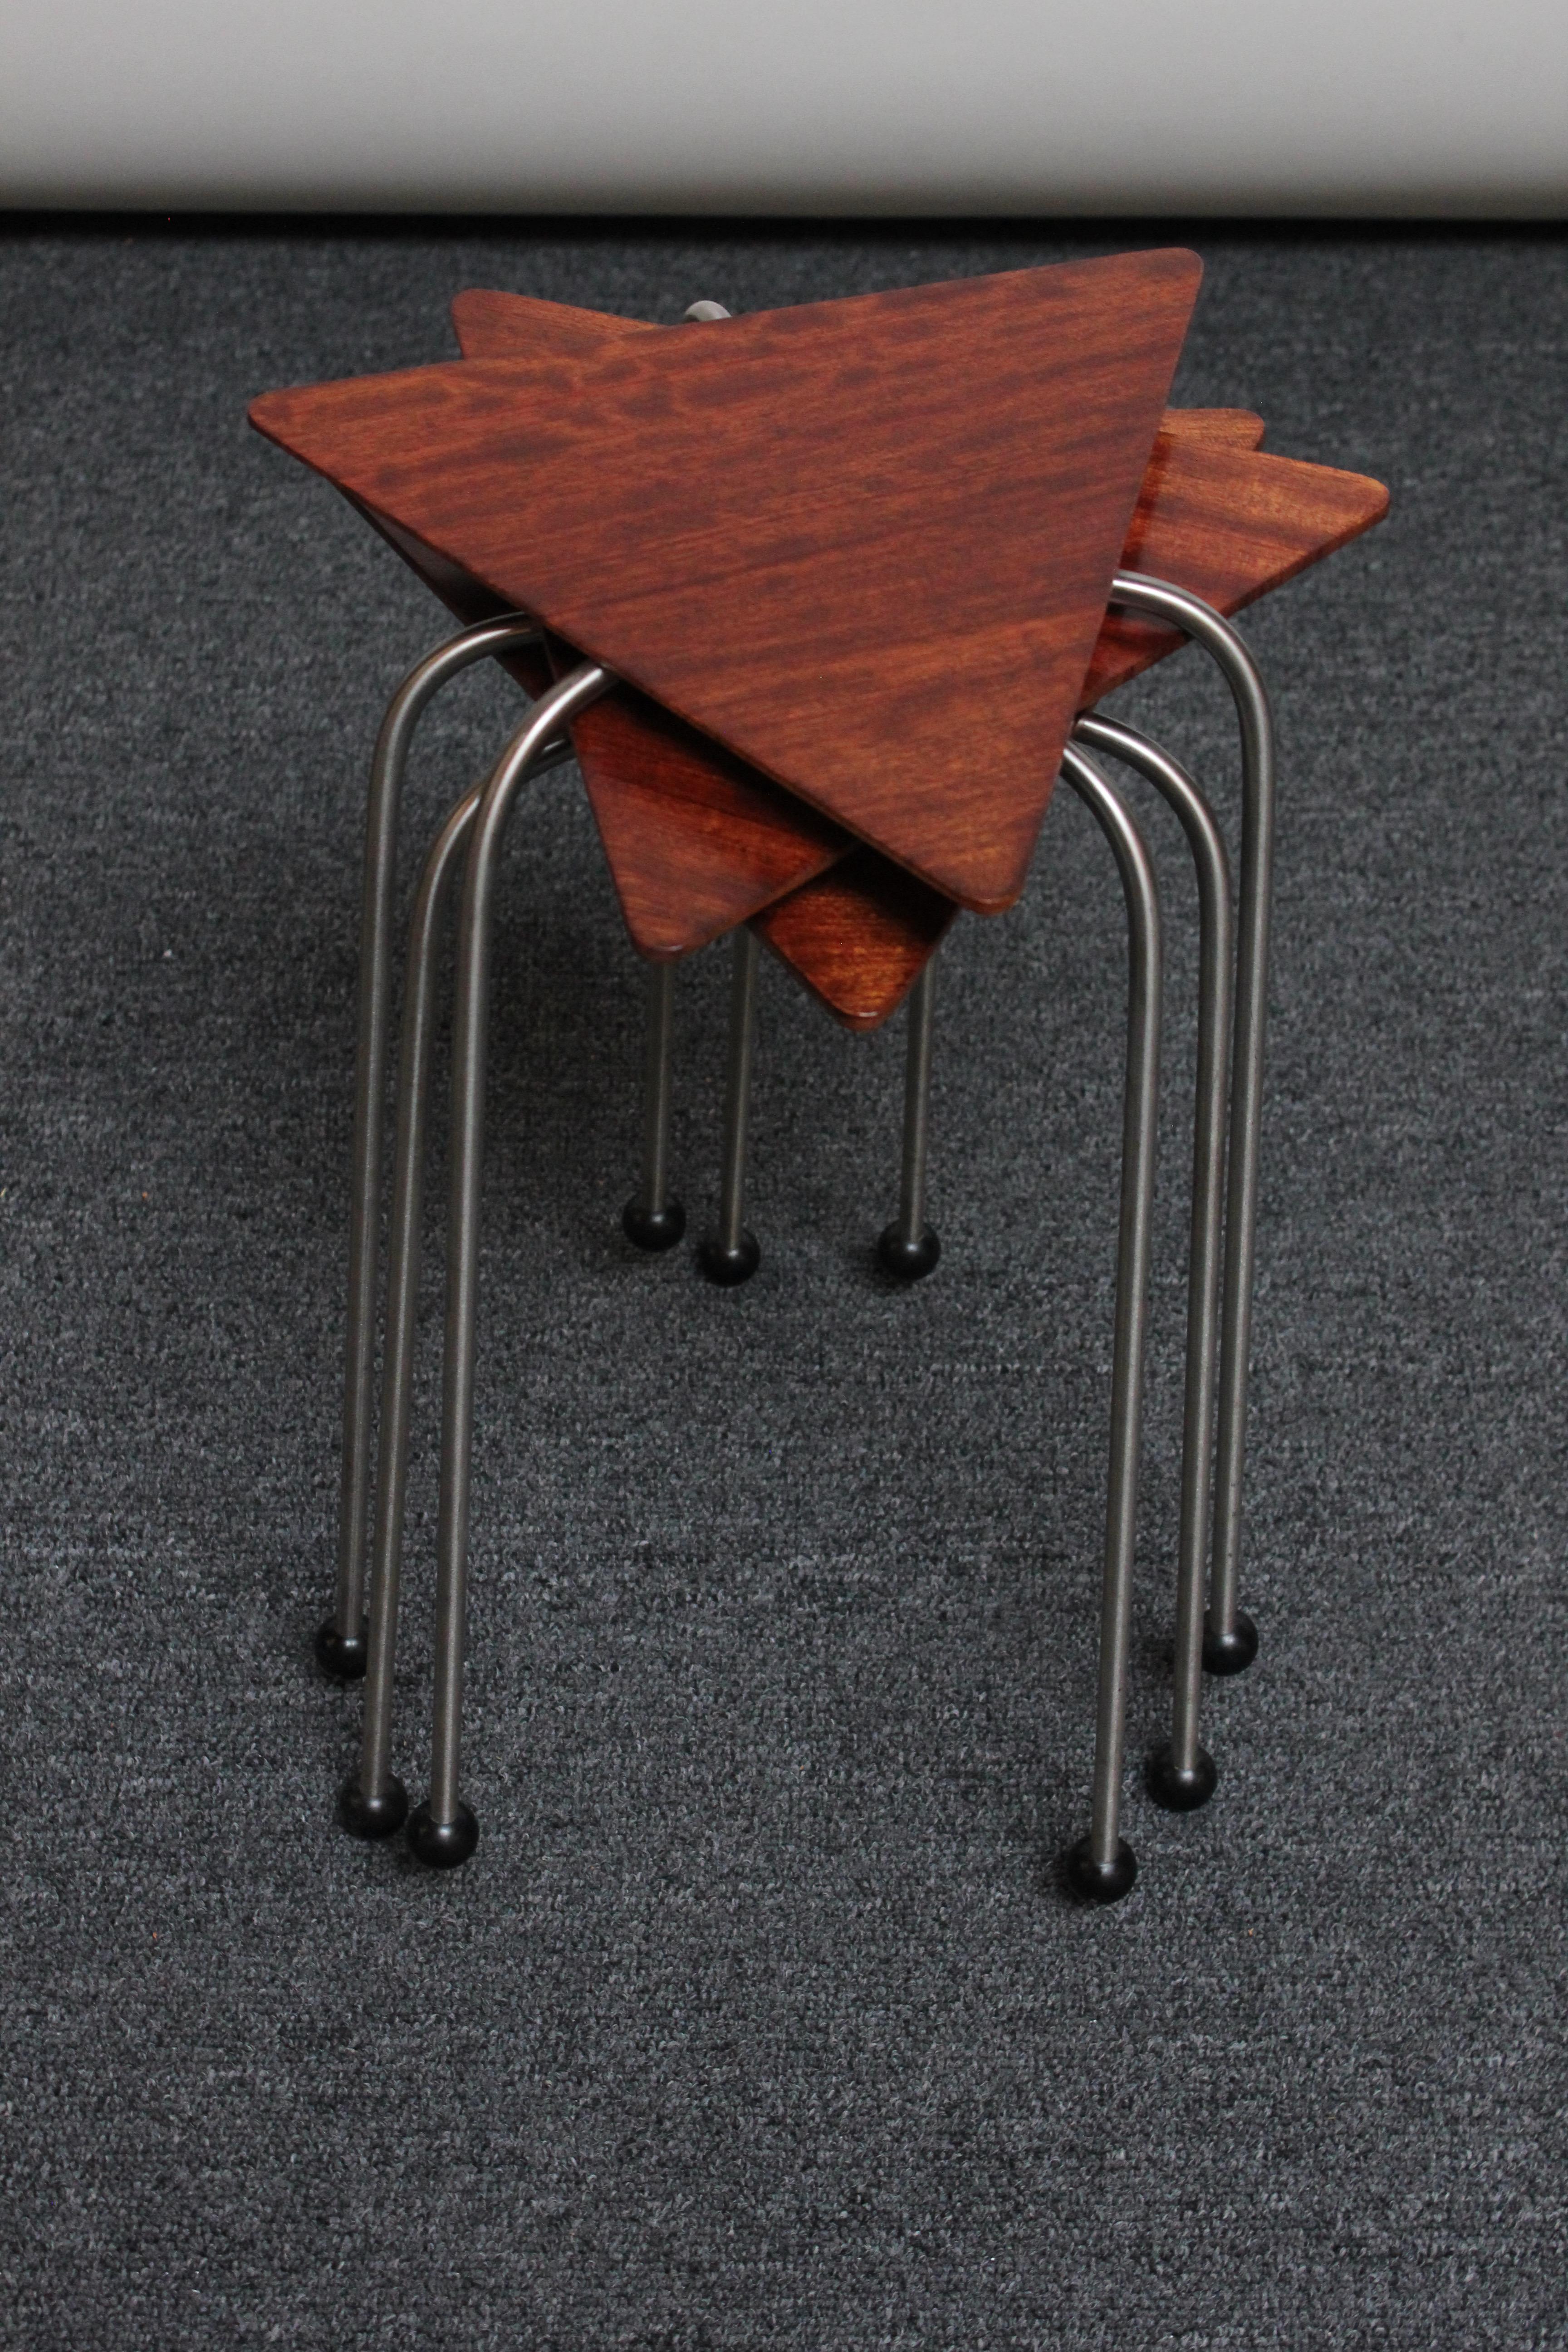 Sculptural stacking tables by contemporary designer, David Kiernan (ca. 1990s, USA). Composed of solid bubinga triangular tops supported by tripod steel rod bases with black orb feet. 
Measures: Triangle tops are 11